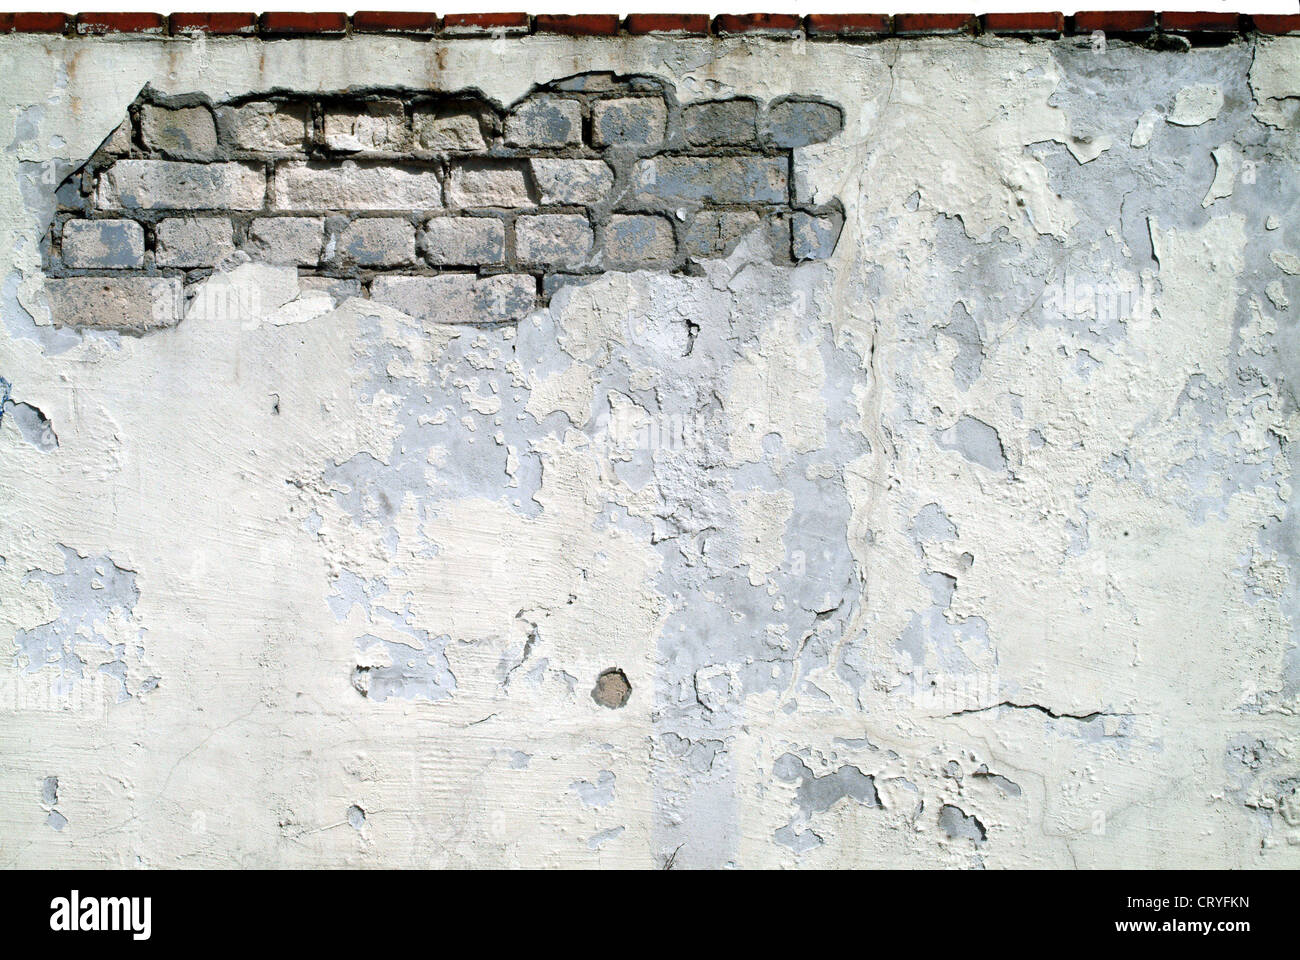 Old house wall with crumbling plaster Stock Photo